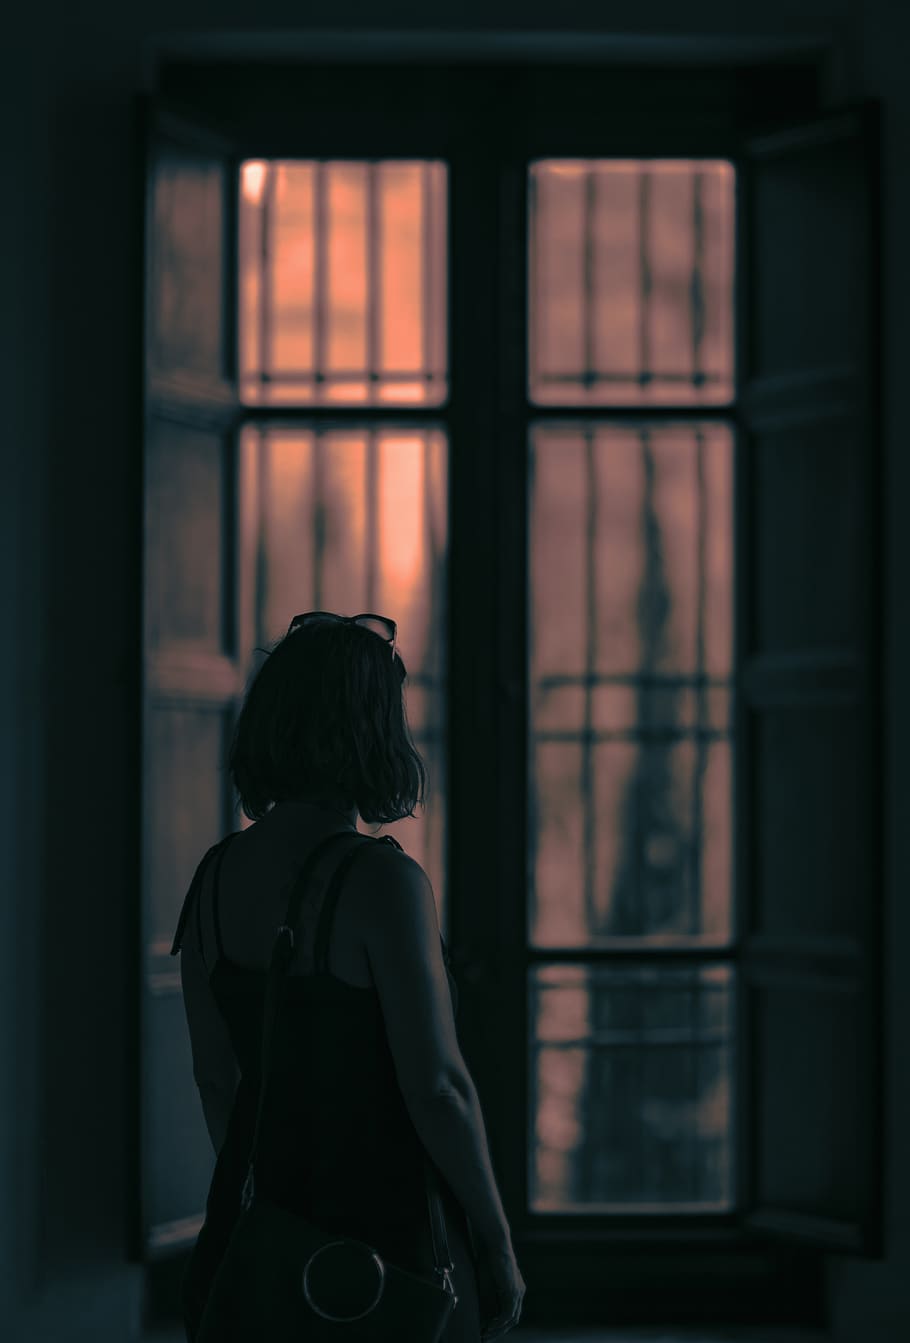 HD wallpaper: silhouette of person standing against windowpane